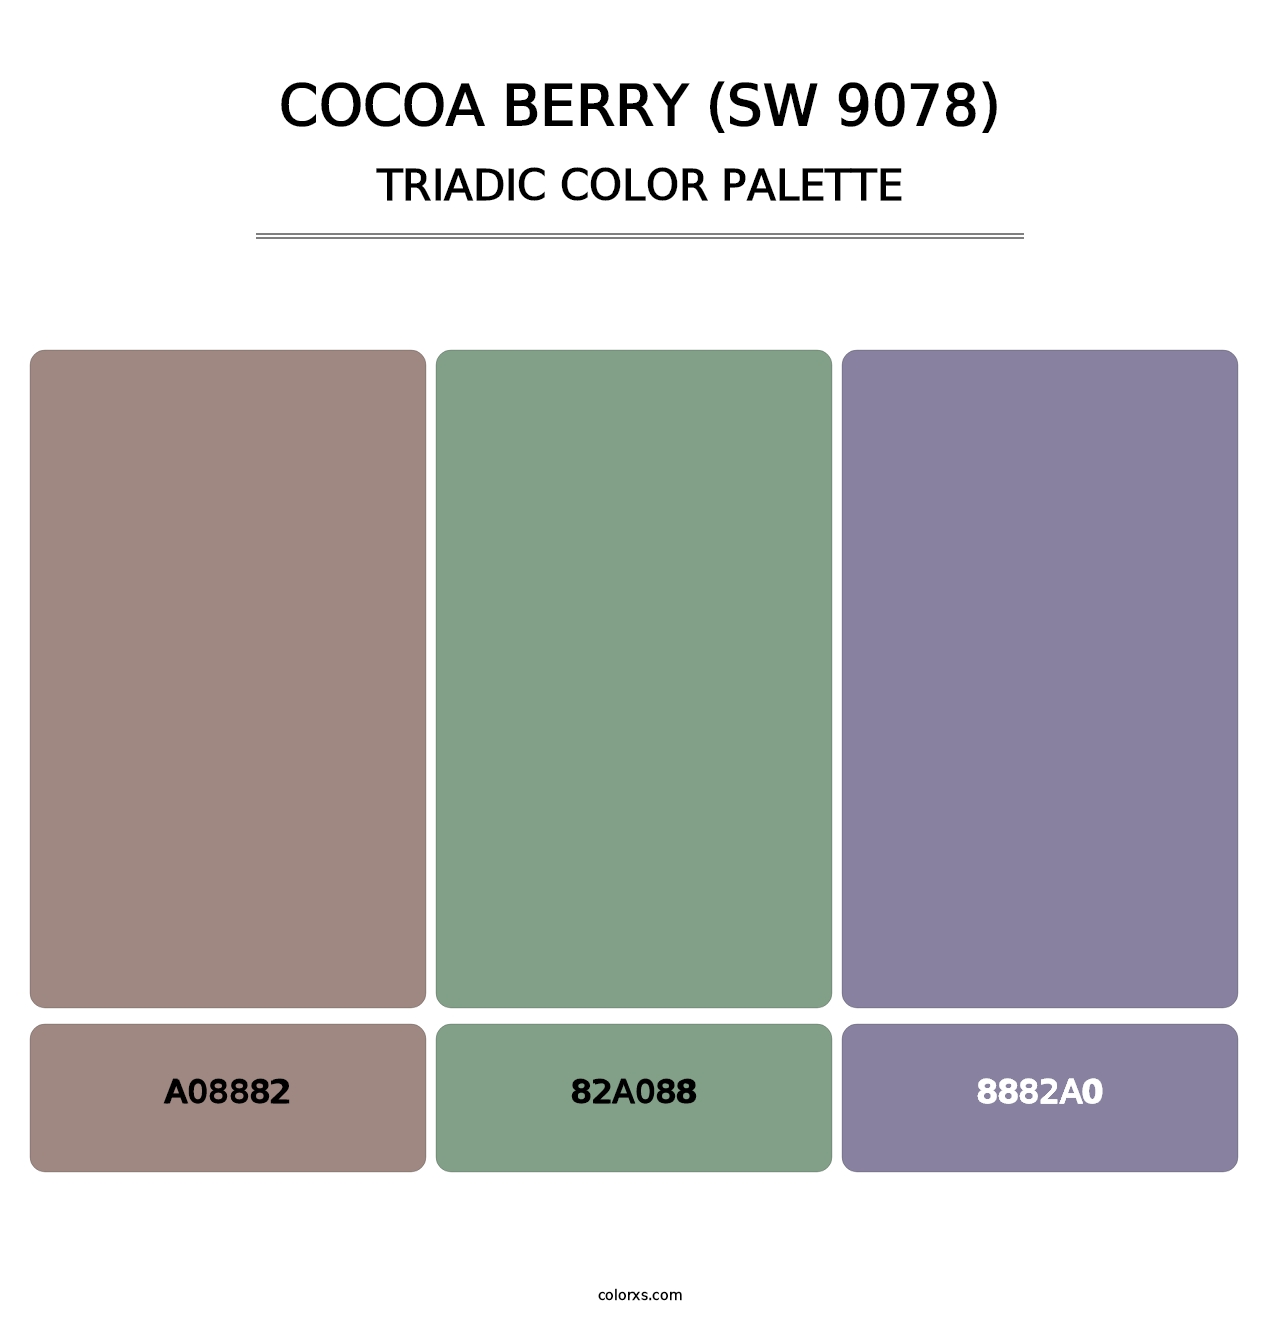 Cocoa Berry (SW 9078) - Triadic Color Palette